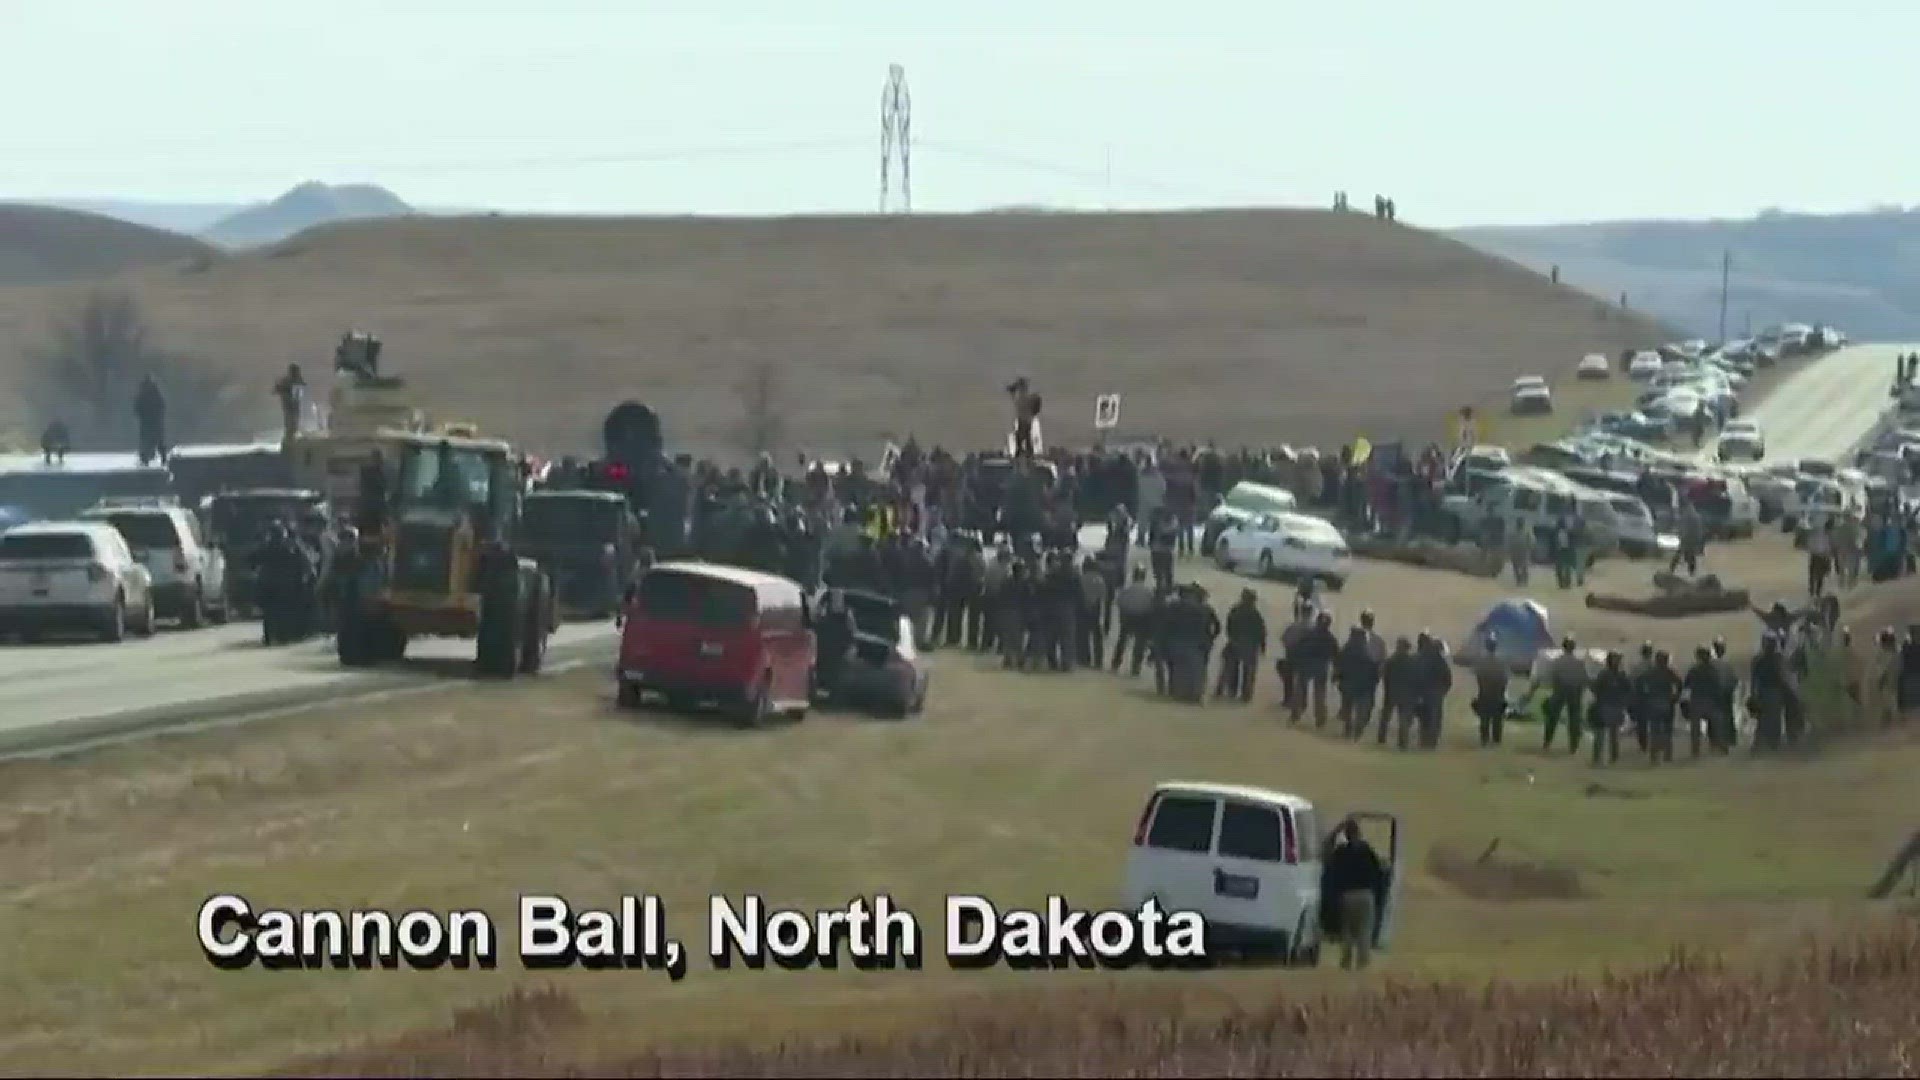 Tension remains high after N.D. pipeline mass arrests